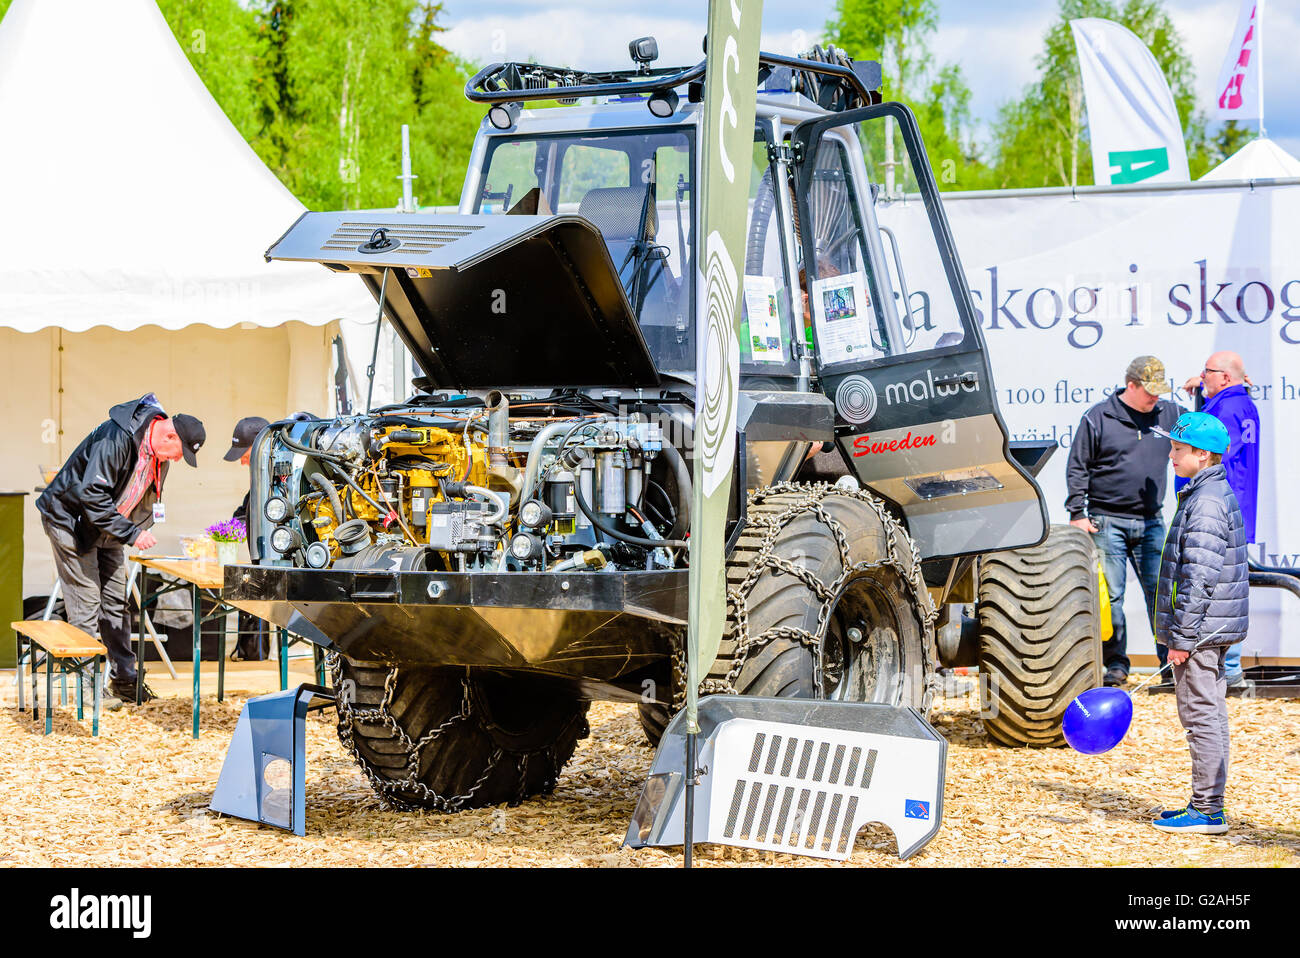 Emmaboda, Sweden - May 14, 2016: Forest and tractor (Skog och traktor) fair. Malwa forwarder with open hood and visible motor. Stock Photo